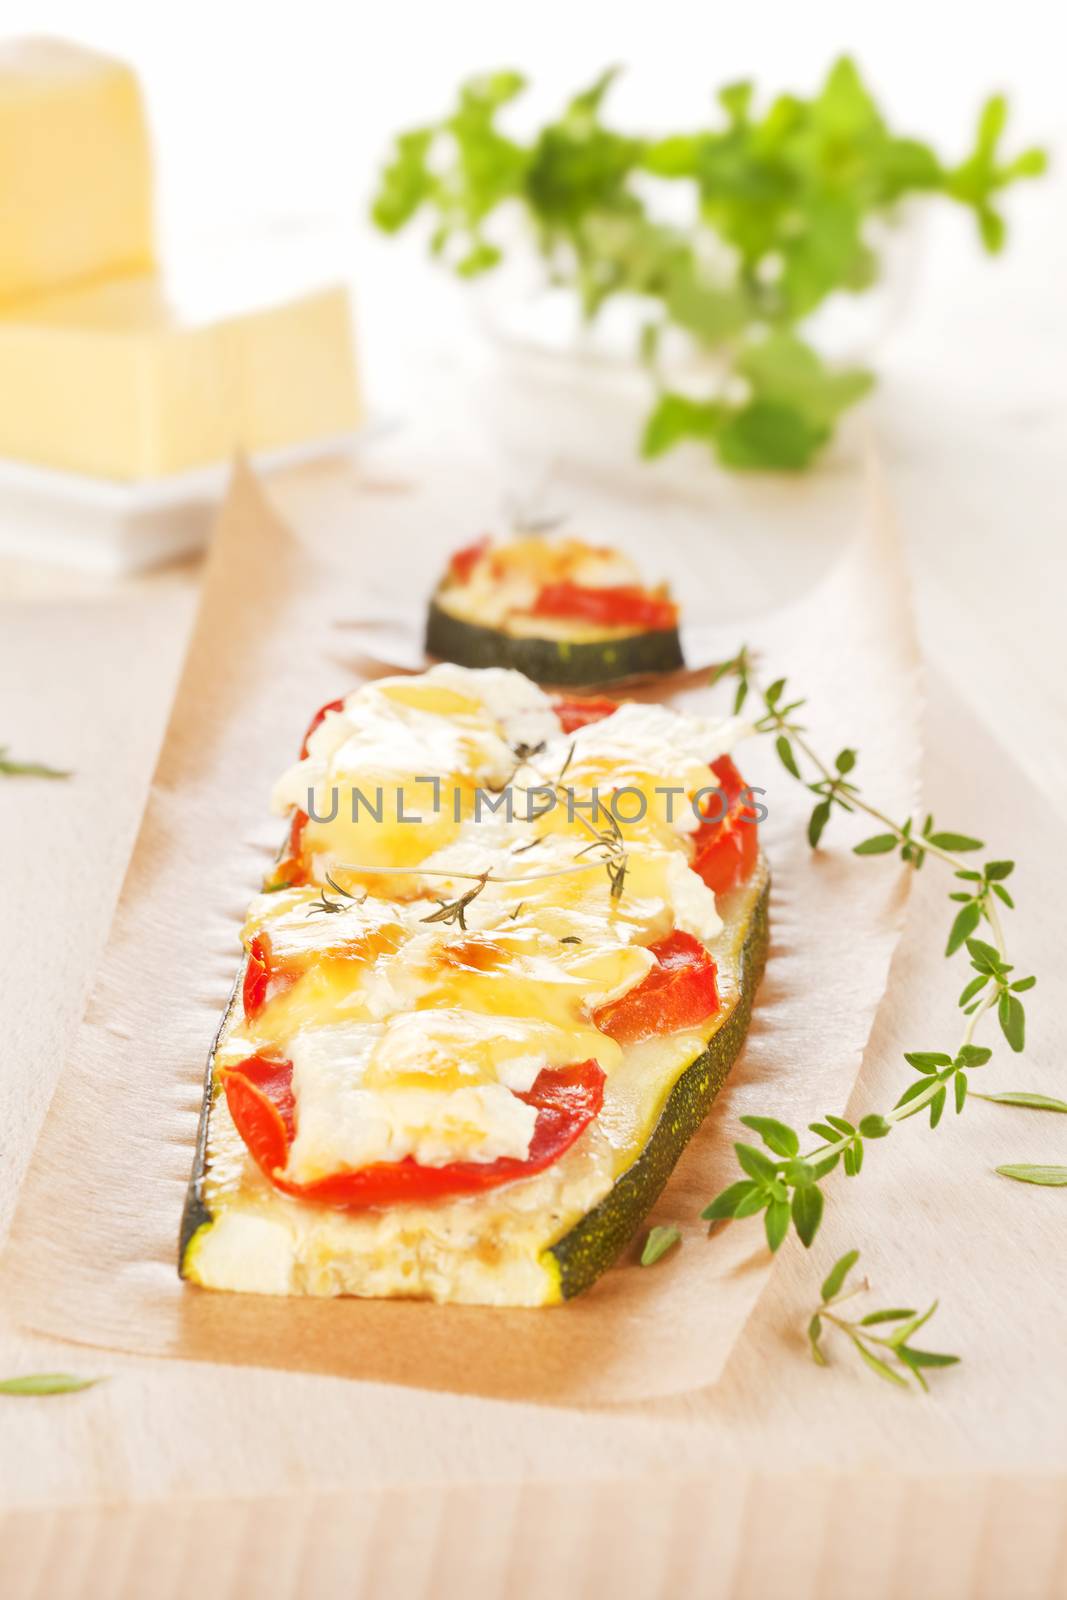 Baked zucchini slices with fresh tomatoes, cheese and herbs. Cheese and fresh herbs in background. Culinary healthy food.